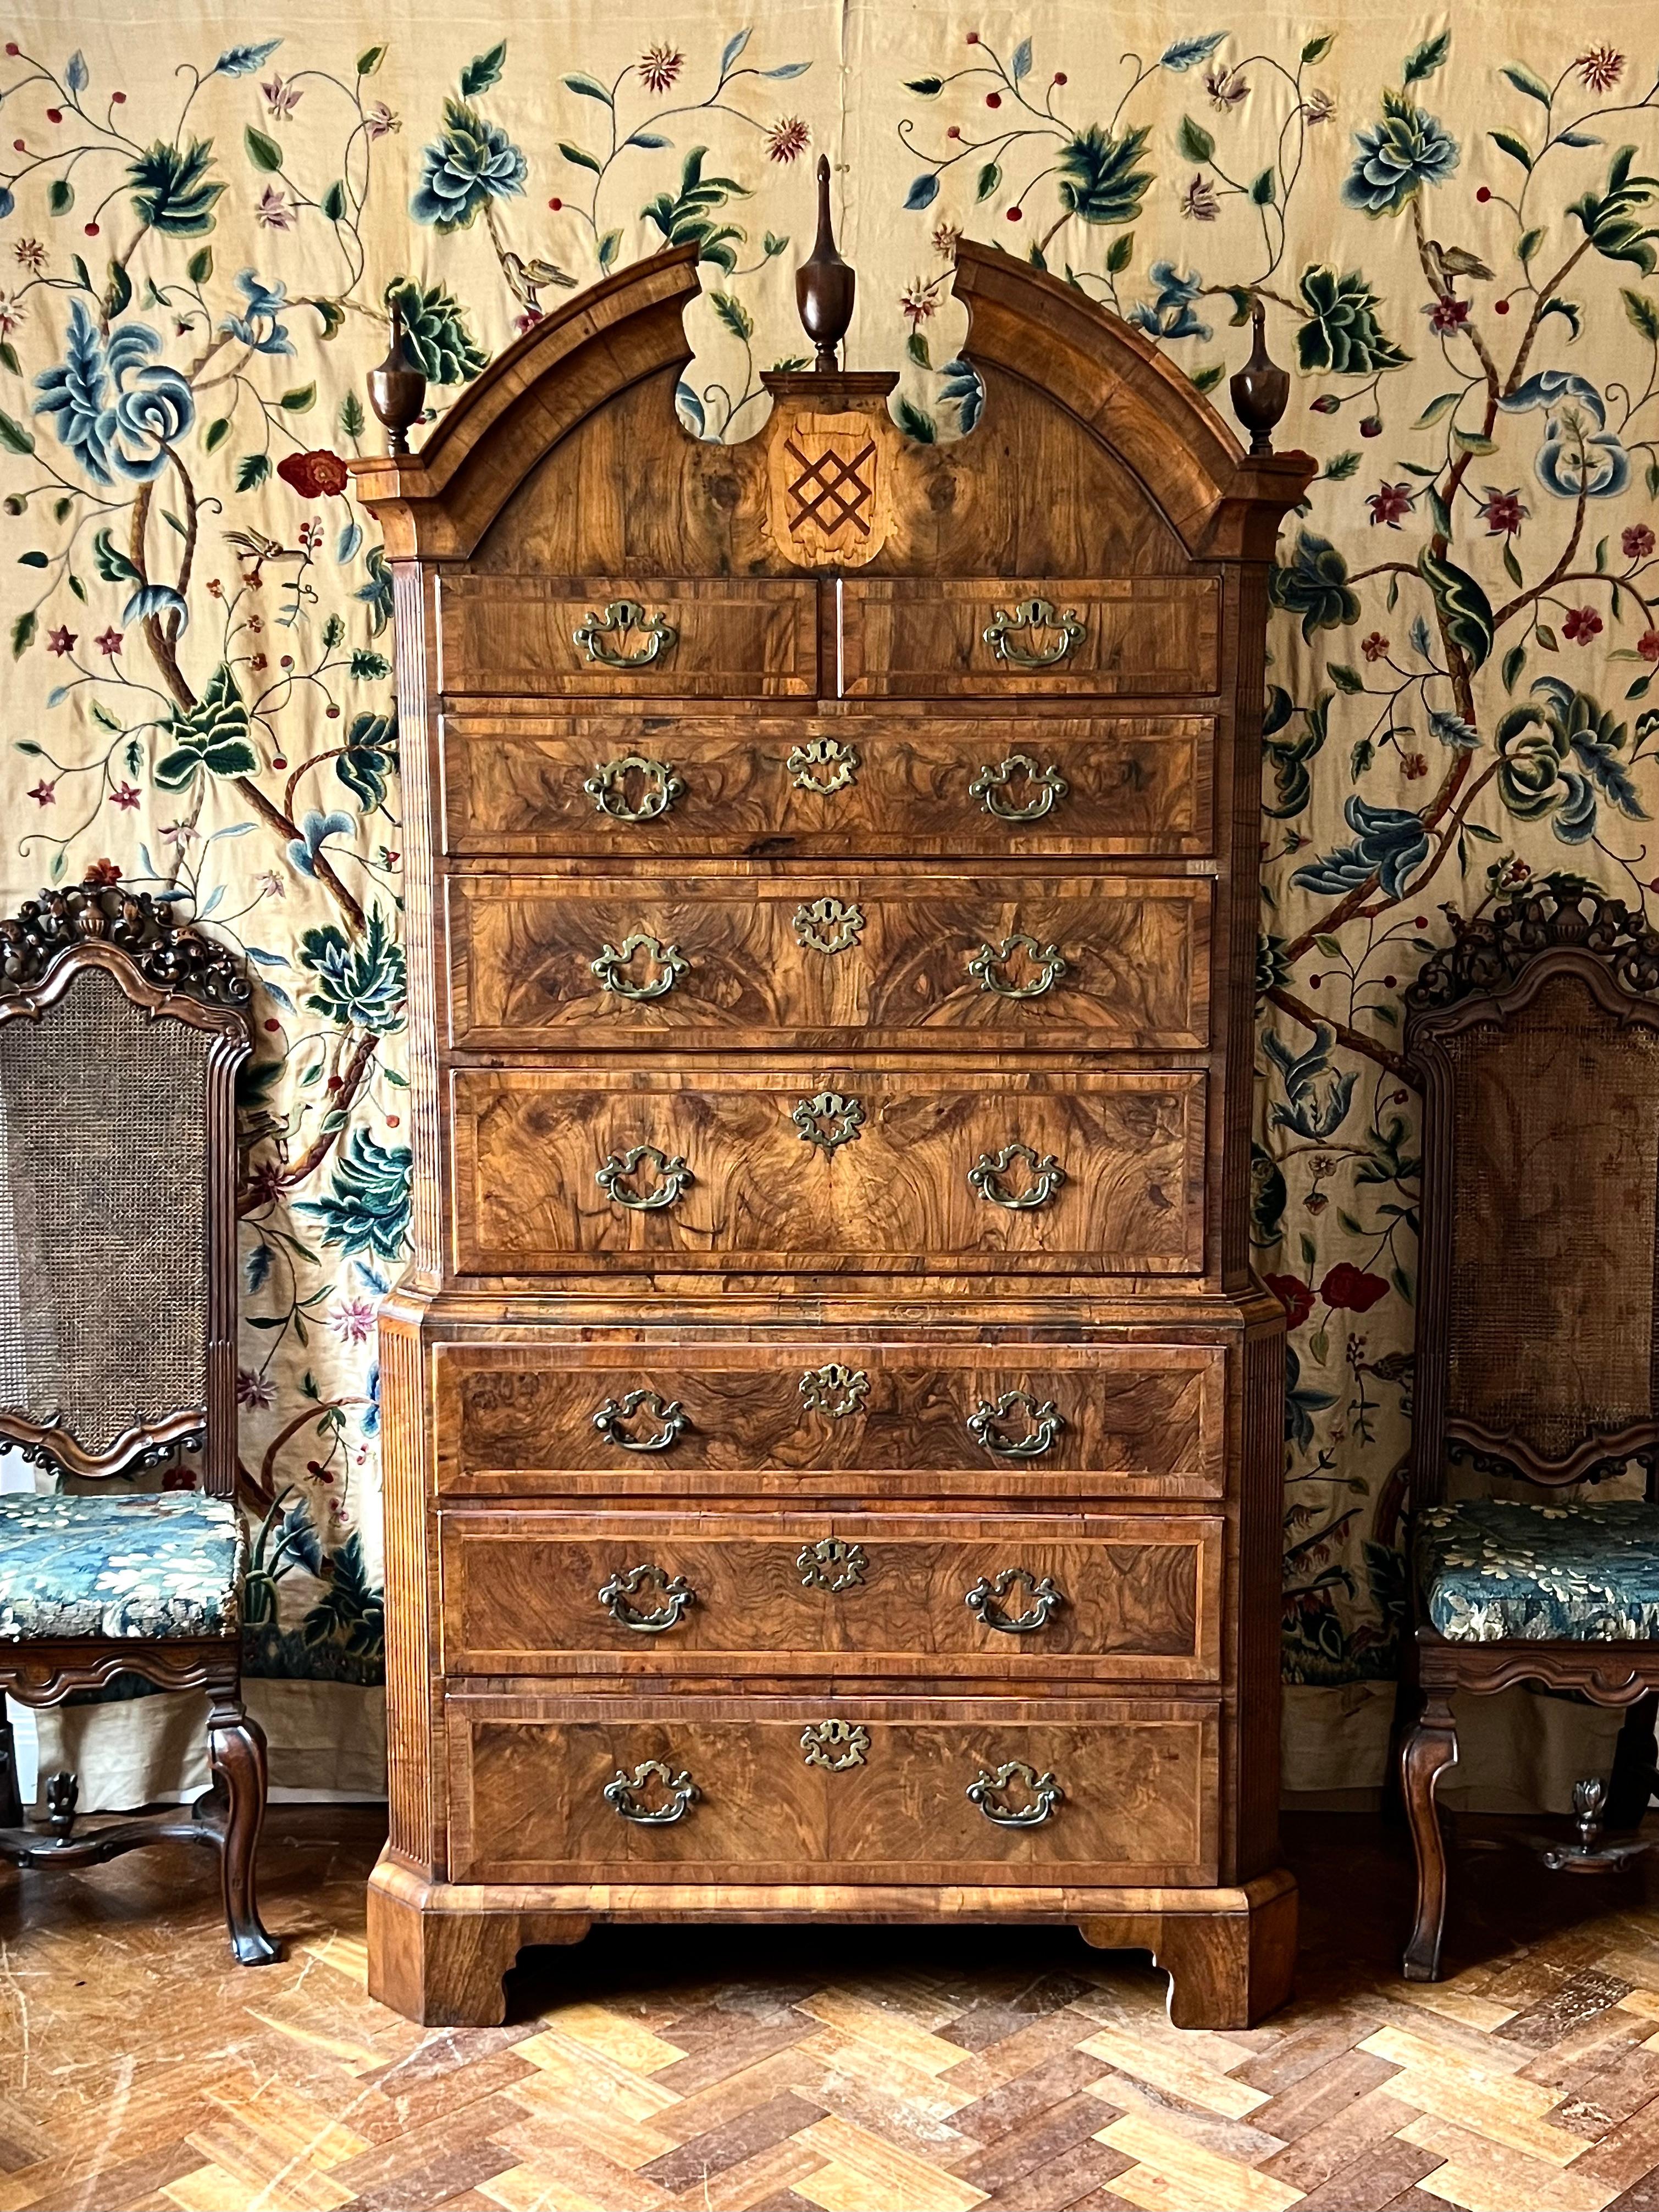 A remarkable English Queen Anne period burr walnut tallboy, ca 1710.

From a private Scottish estate. This provenance adds further weight to its Masonic association.

Walnut tallboys, when of this architectural form and proportions, have always been